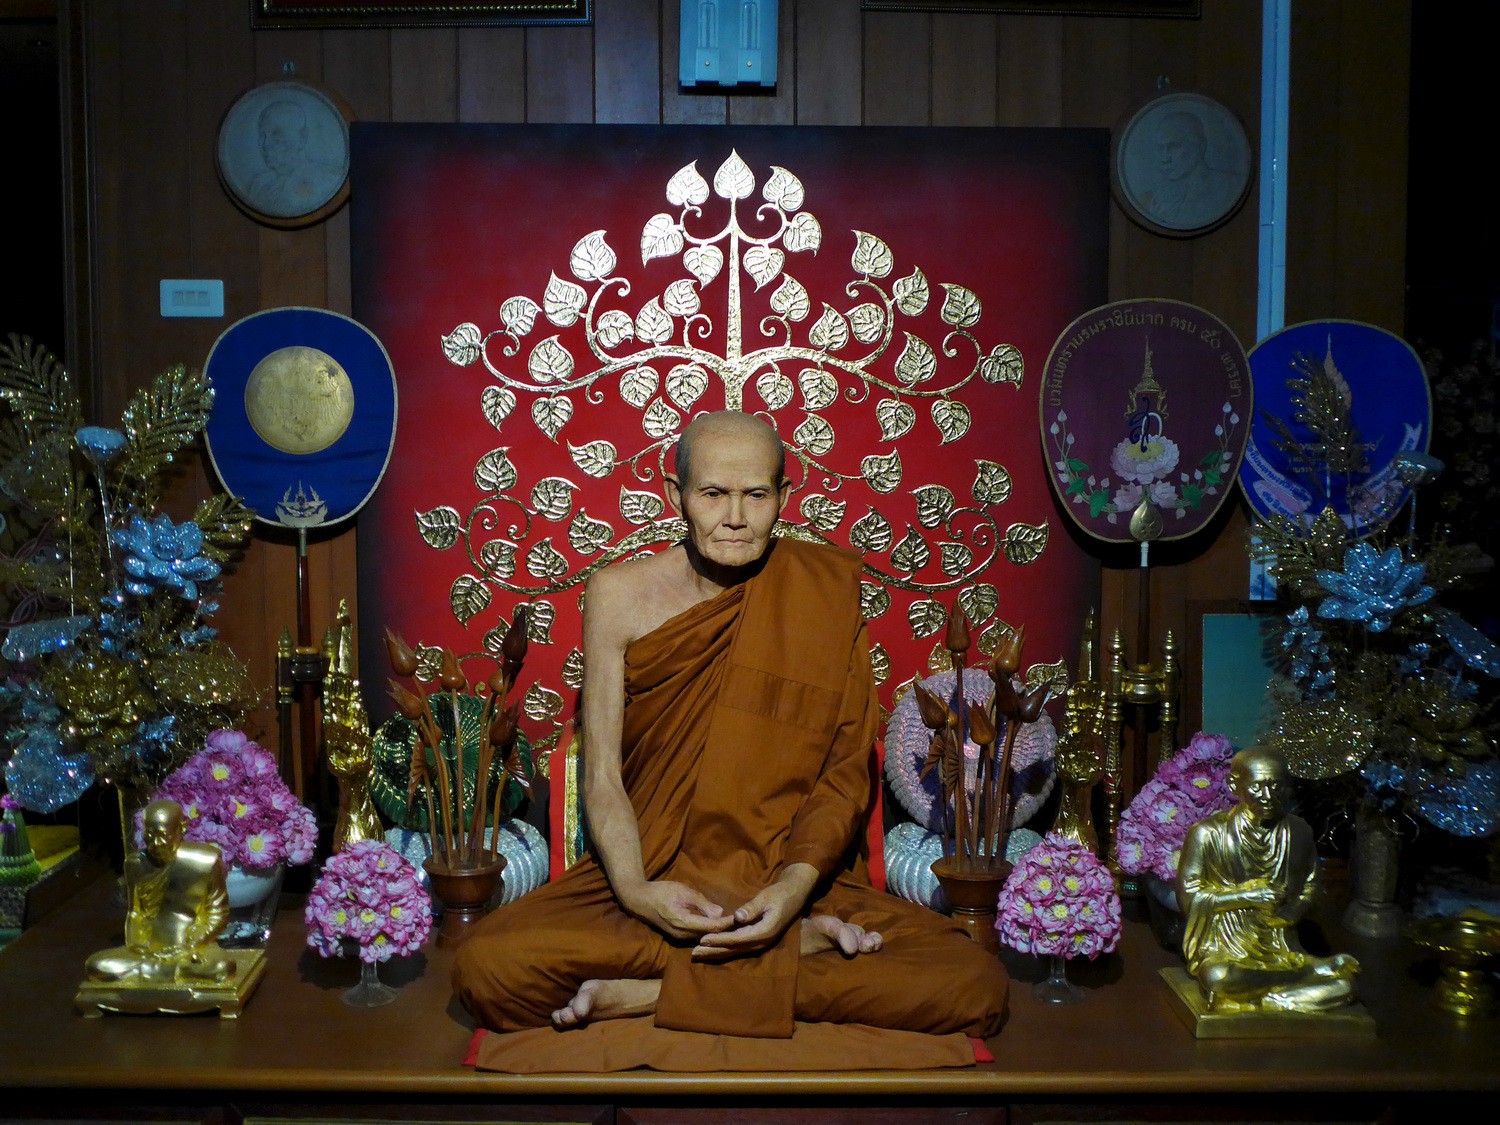 Another wax figure in the temple northwest of our hostel